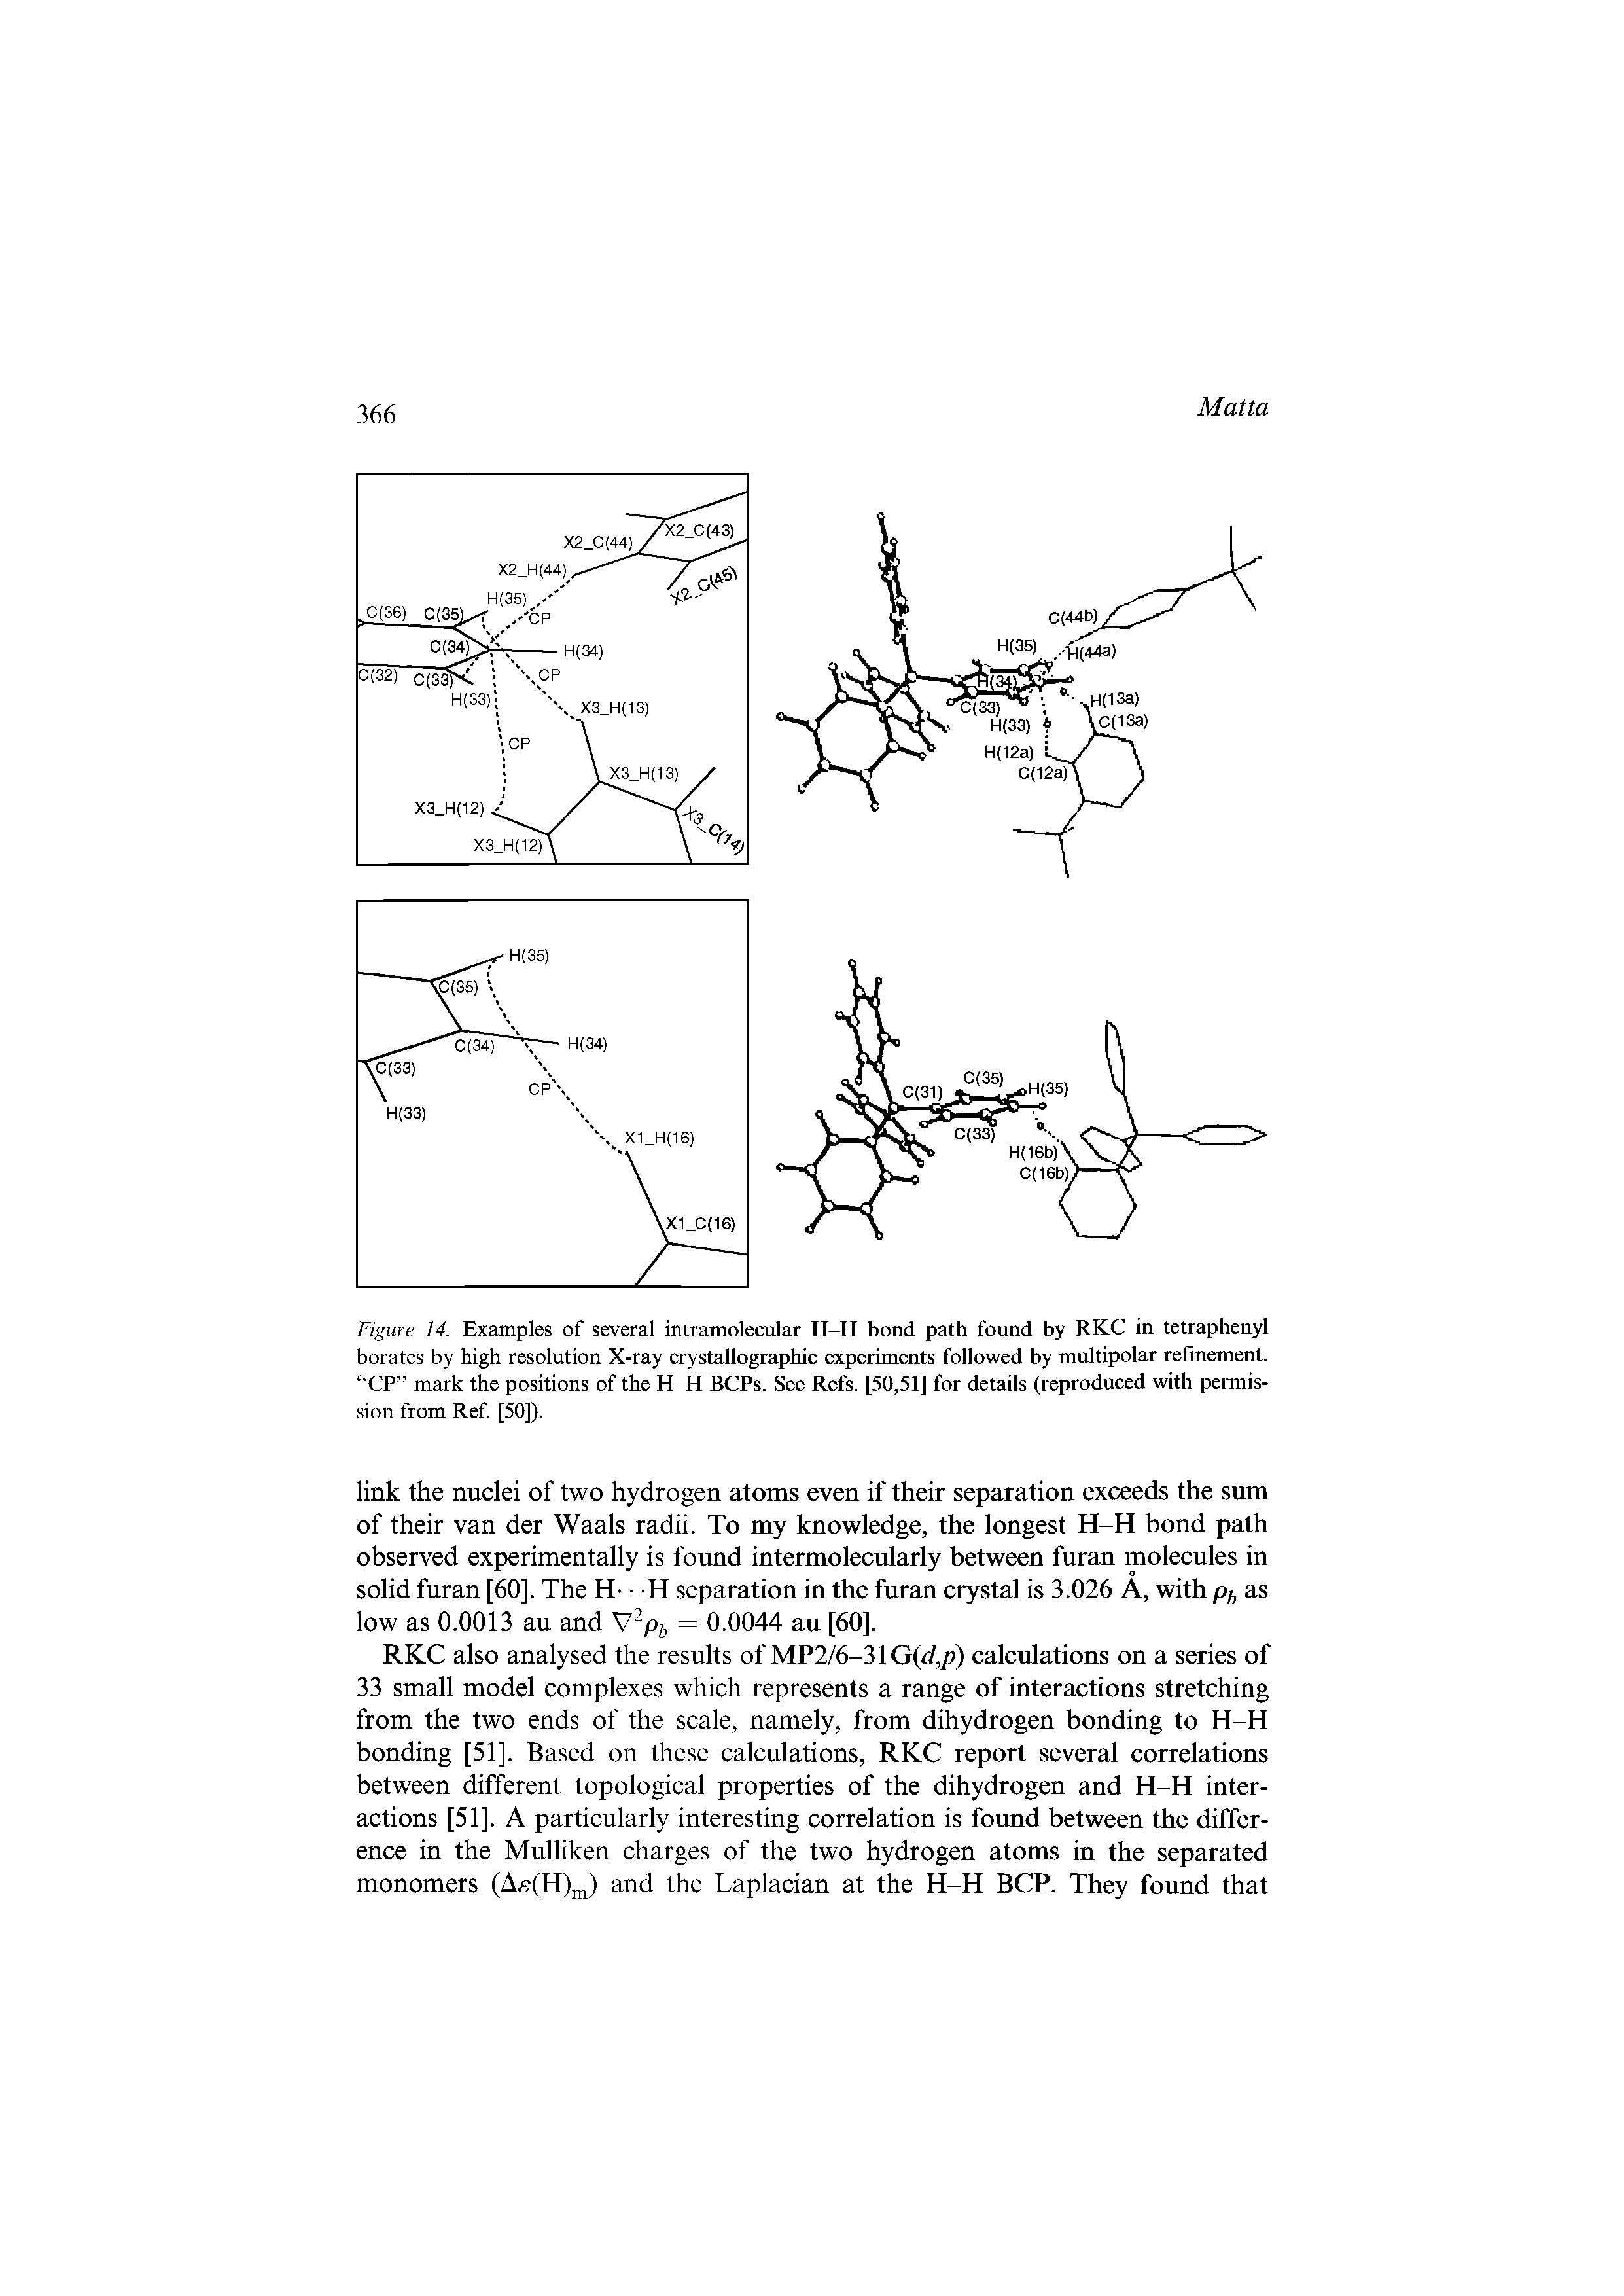 Figure 14. Examples of several intramolecular H H bond path found by RKC in tetraphenyl borates by high resolution X-ray crystallographic experiments followed by multipolar refinement. CP mark the positions of the H H BCPs. See Refs. [50,51] for details (reproduced with permission from Ref [50]).